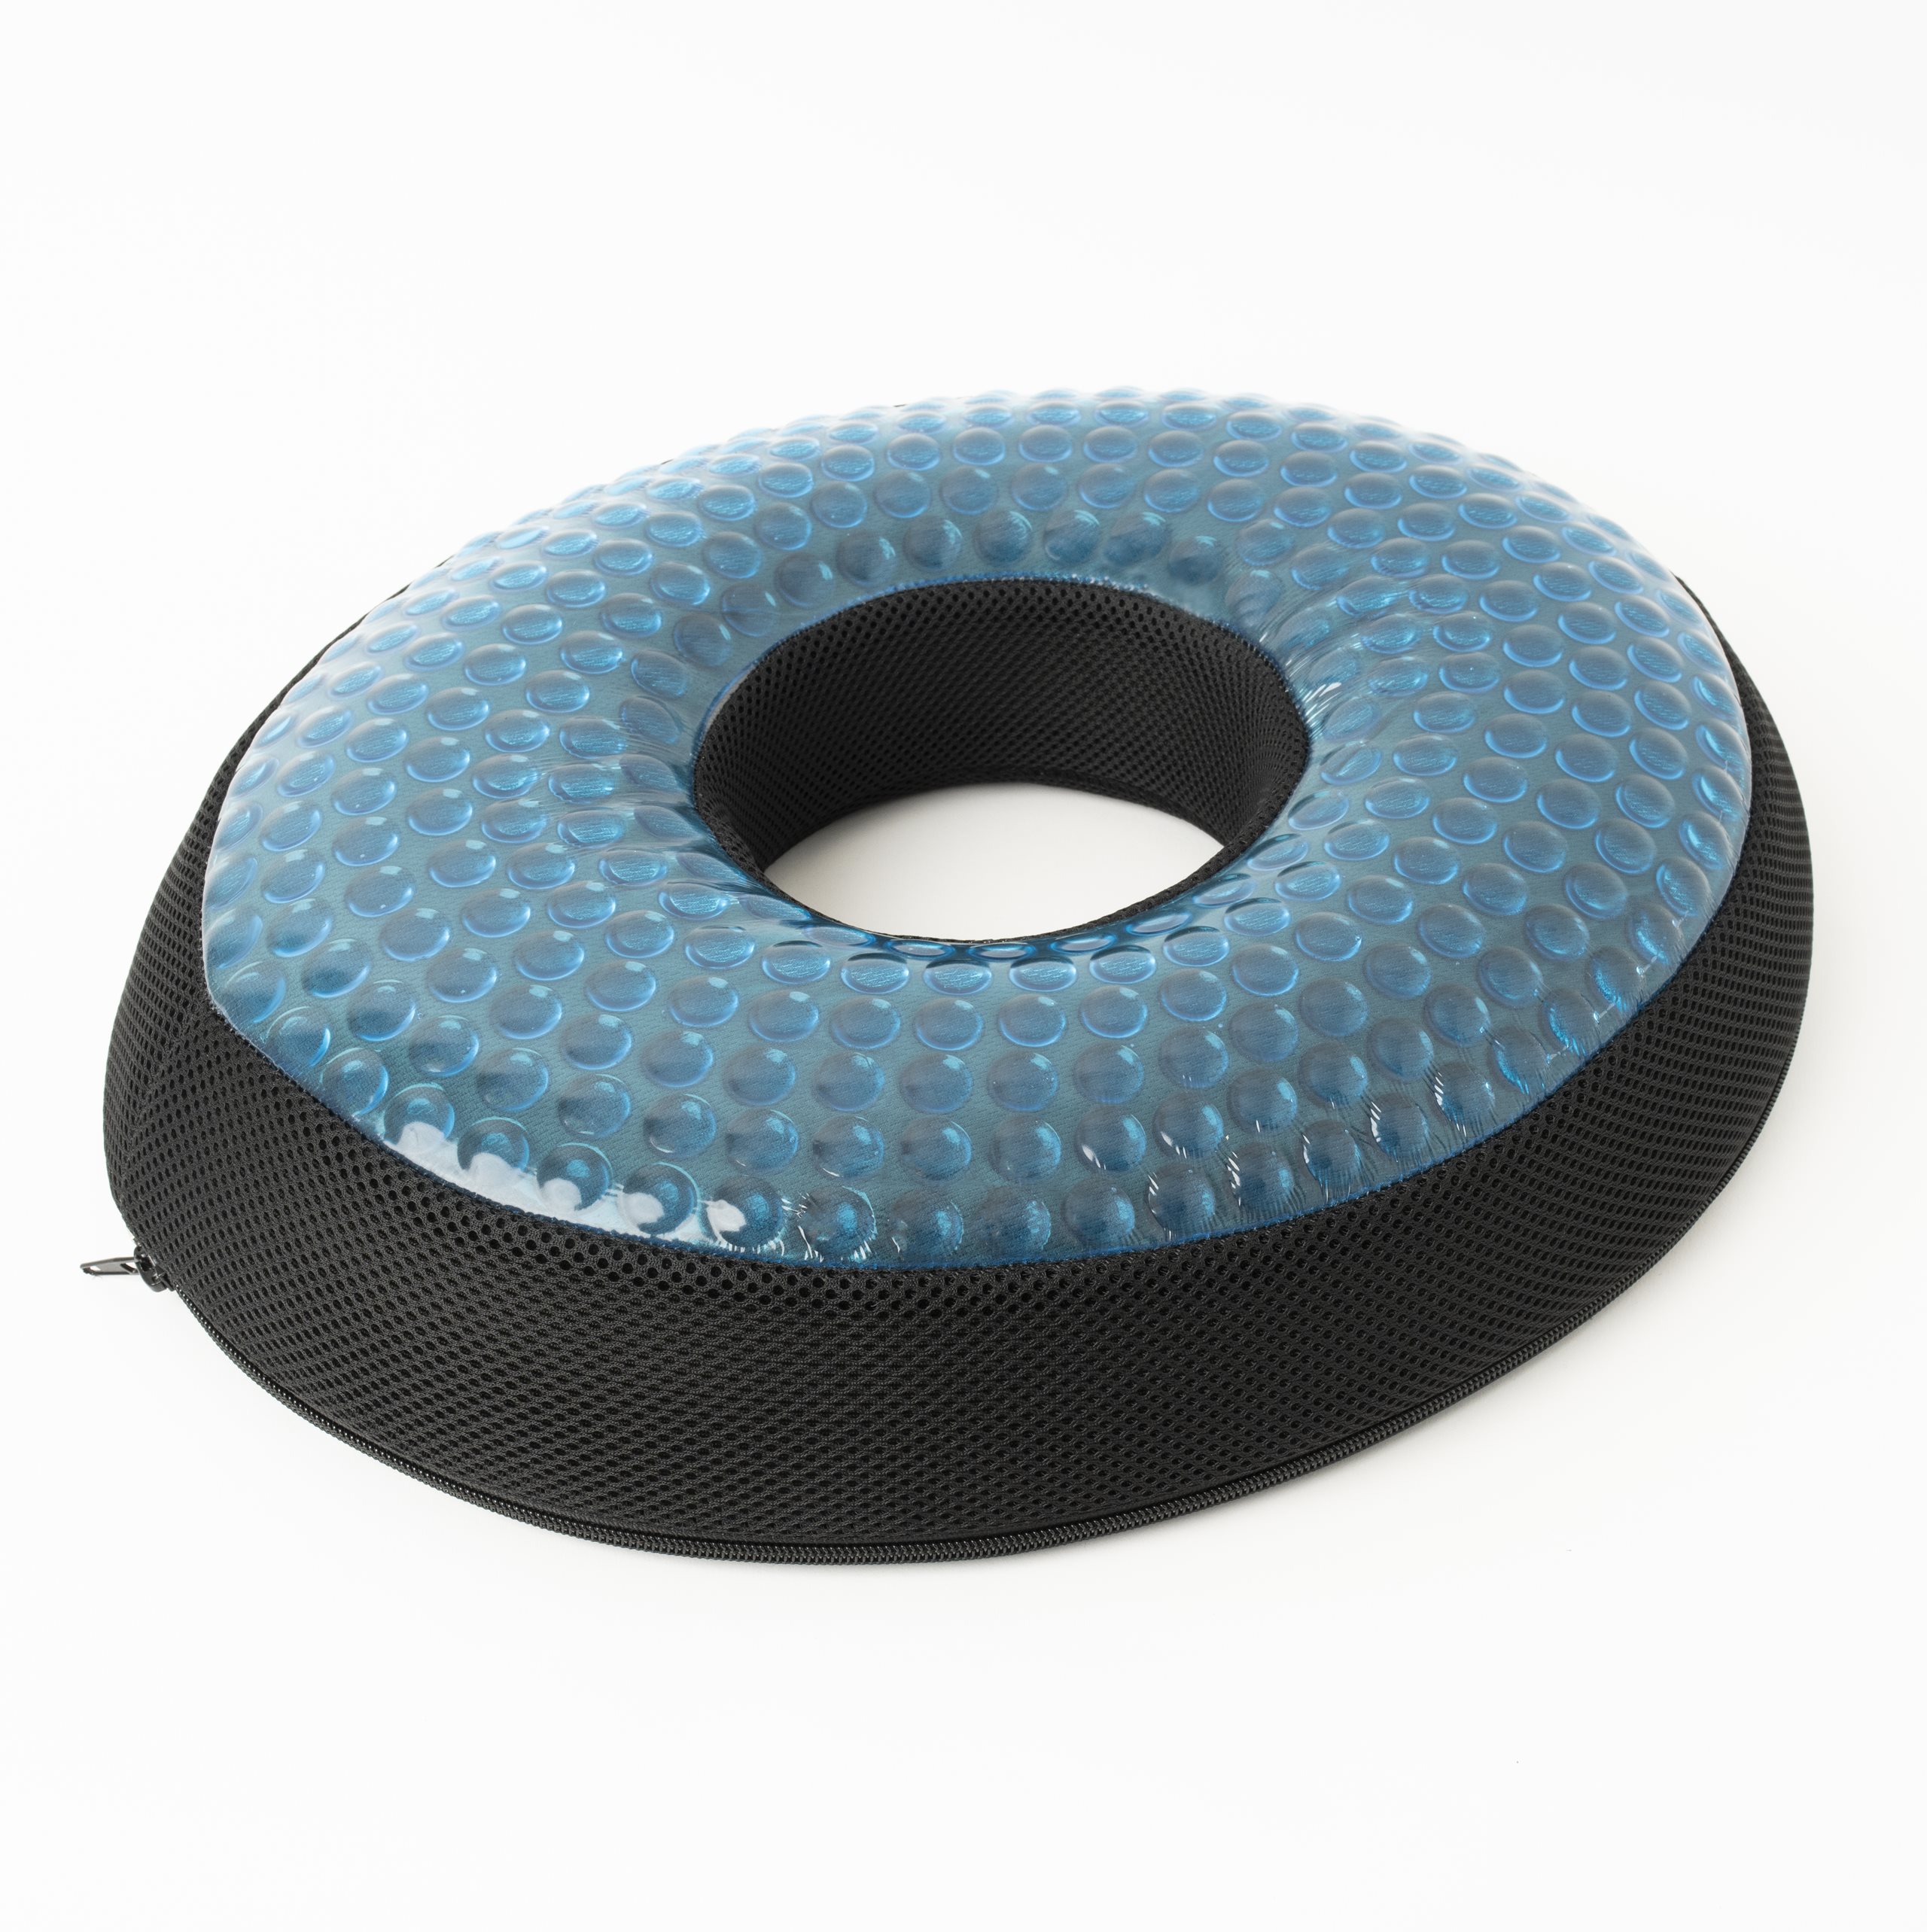 Round Shape Blue And Black Ring OR Donut Coccyx Seat Cushion